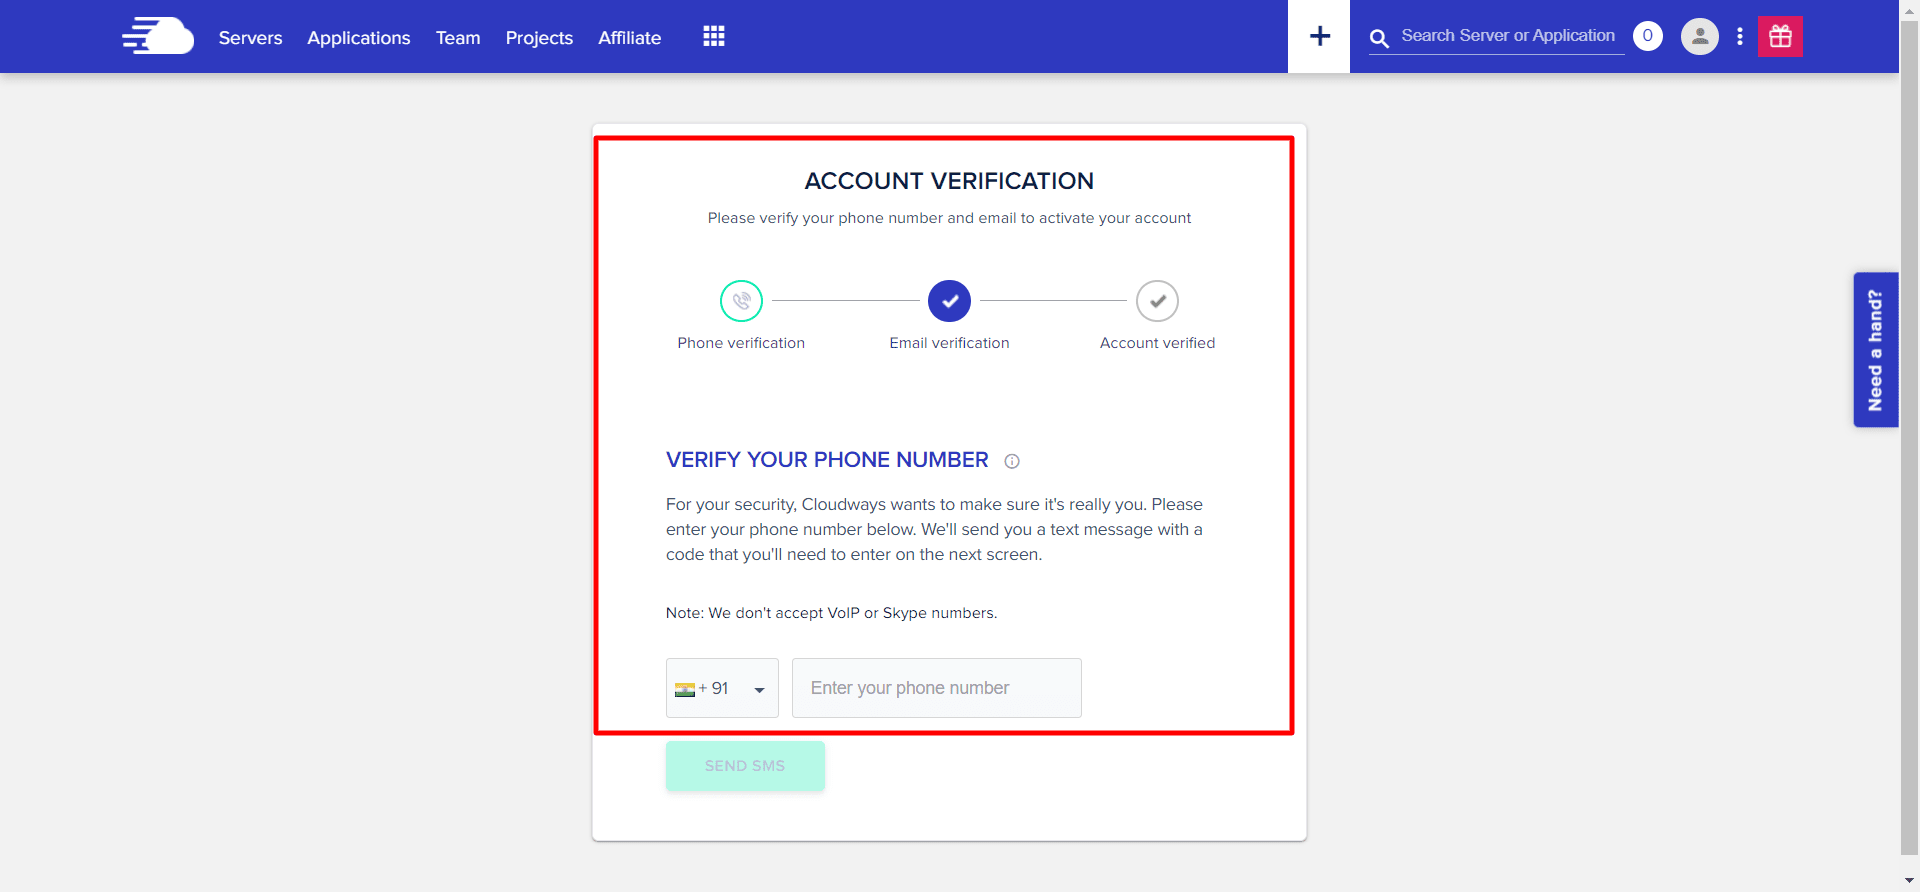 email and phone verificatiion in cloudways